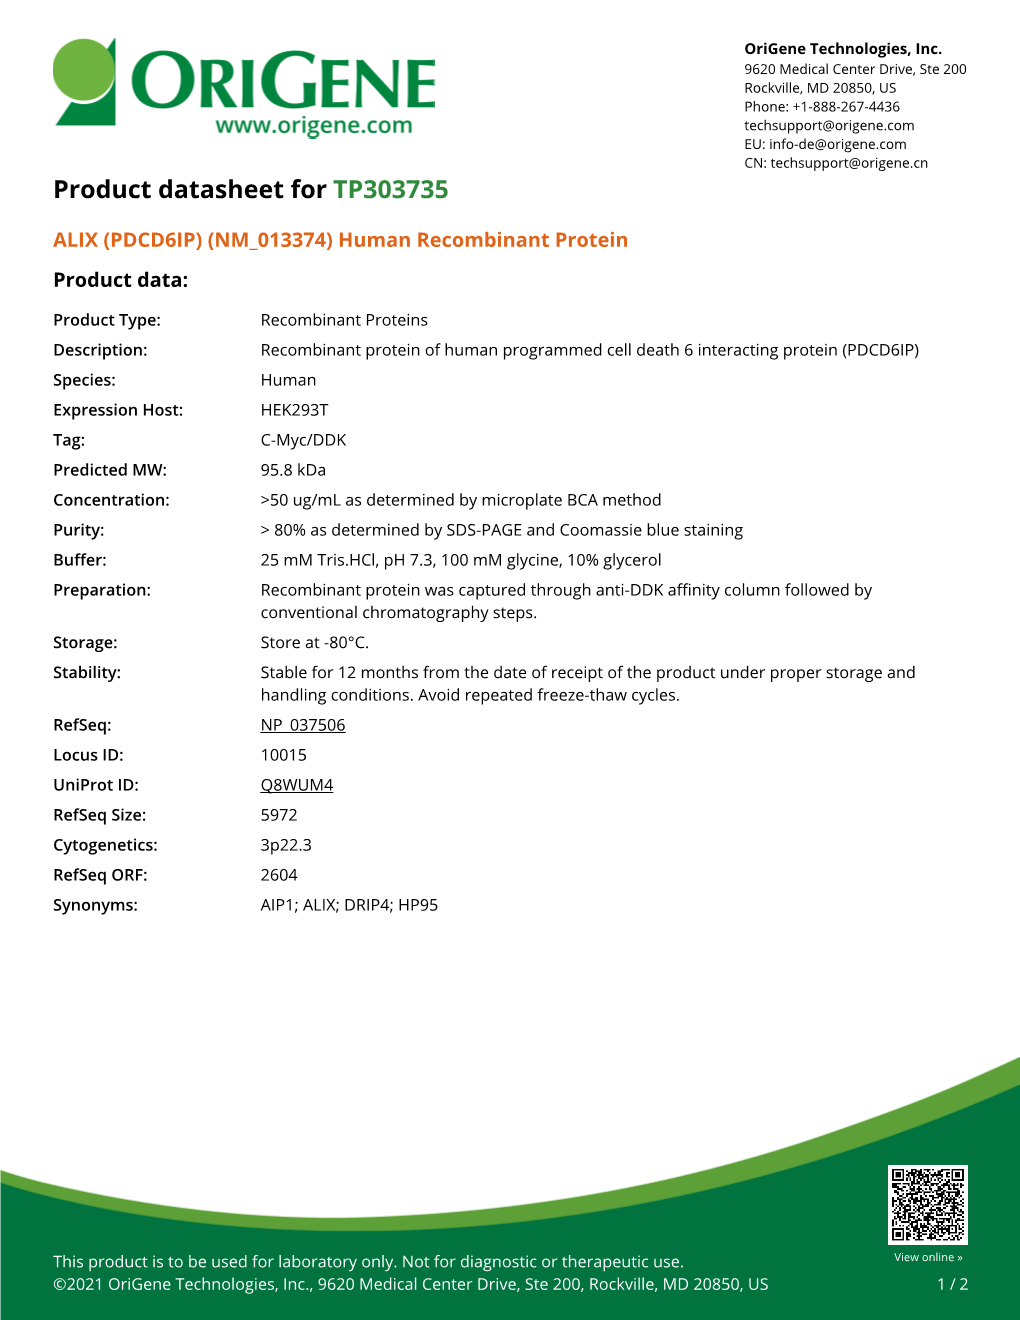 ALIX (PDCD6IP) (NM 013374) Human Recombinant Protein Product Data